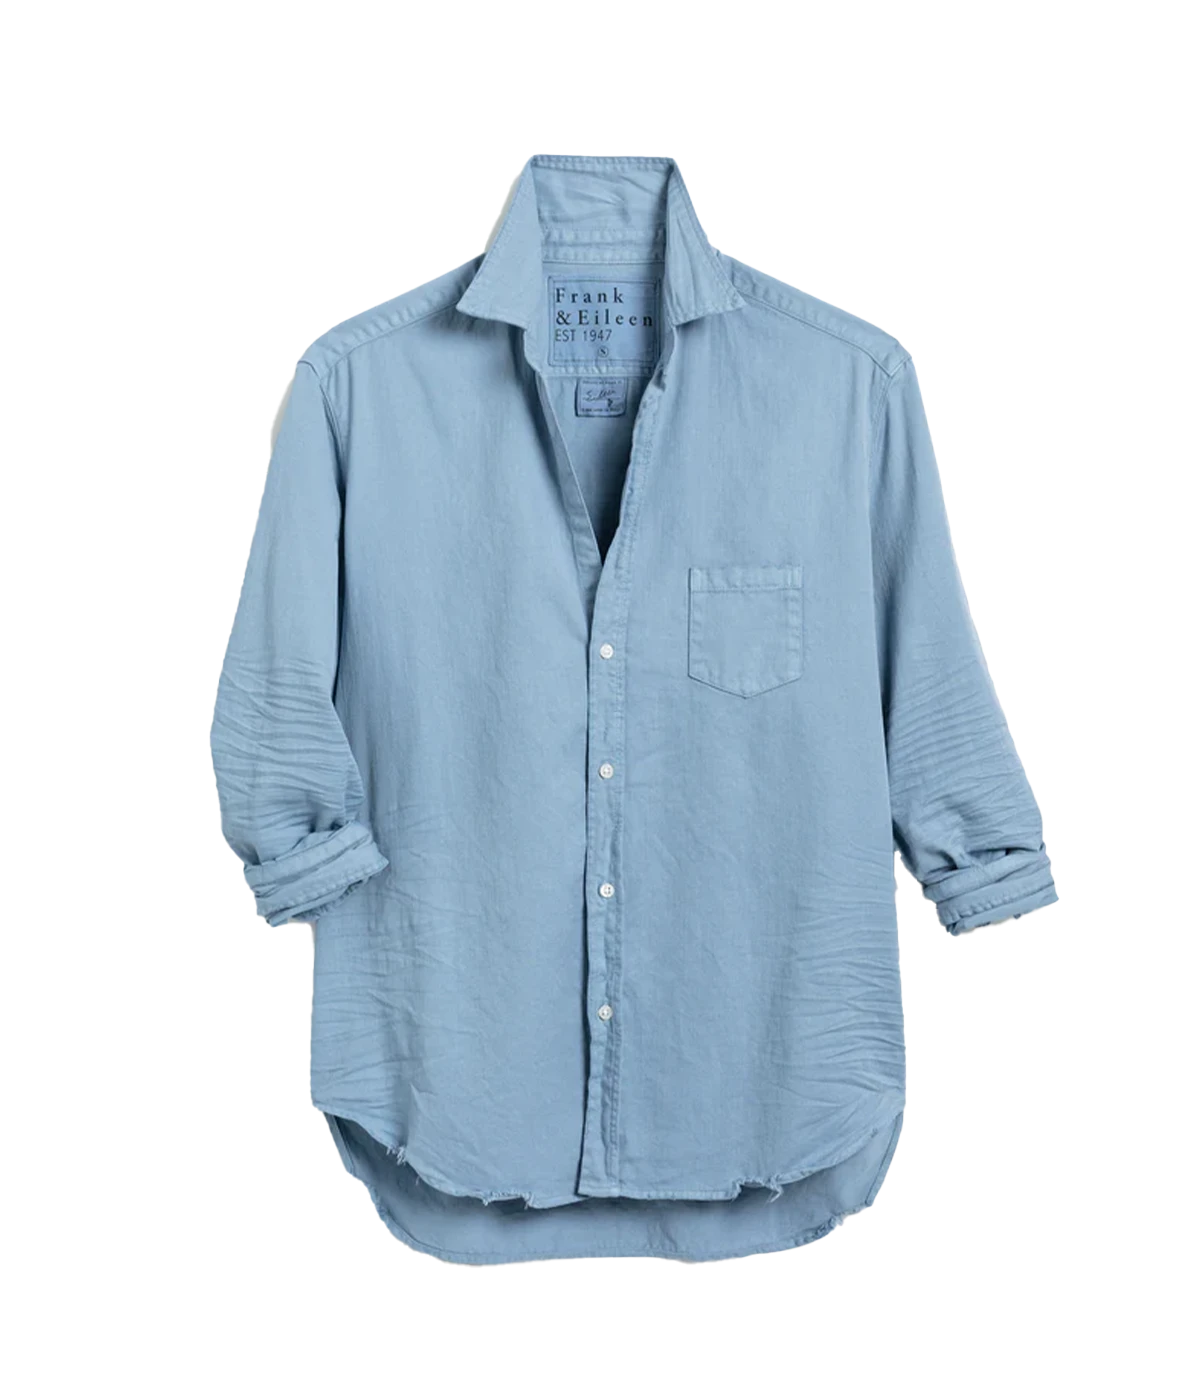 A hand-dyed and distressed soft blue denim shirt by Frank and Eileen. Flattering bust fit that covers your bum, wash and wear this bra-friendly shirt with anything. 